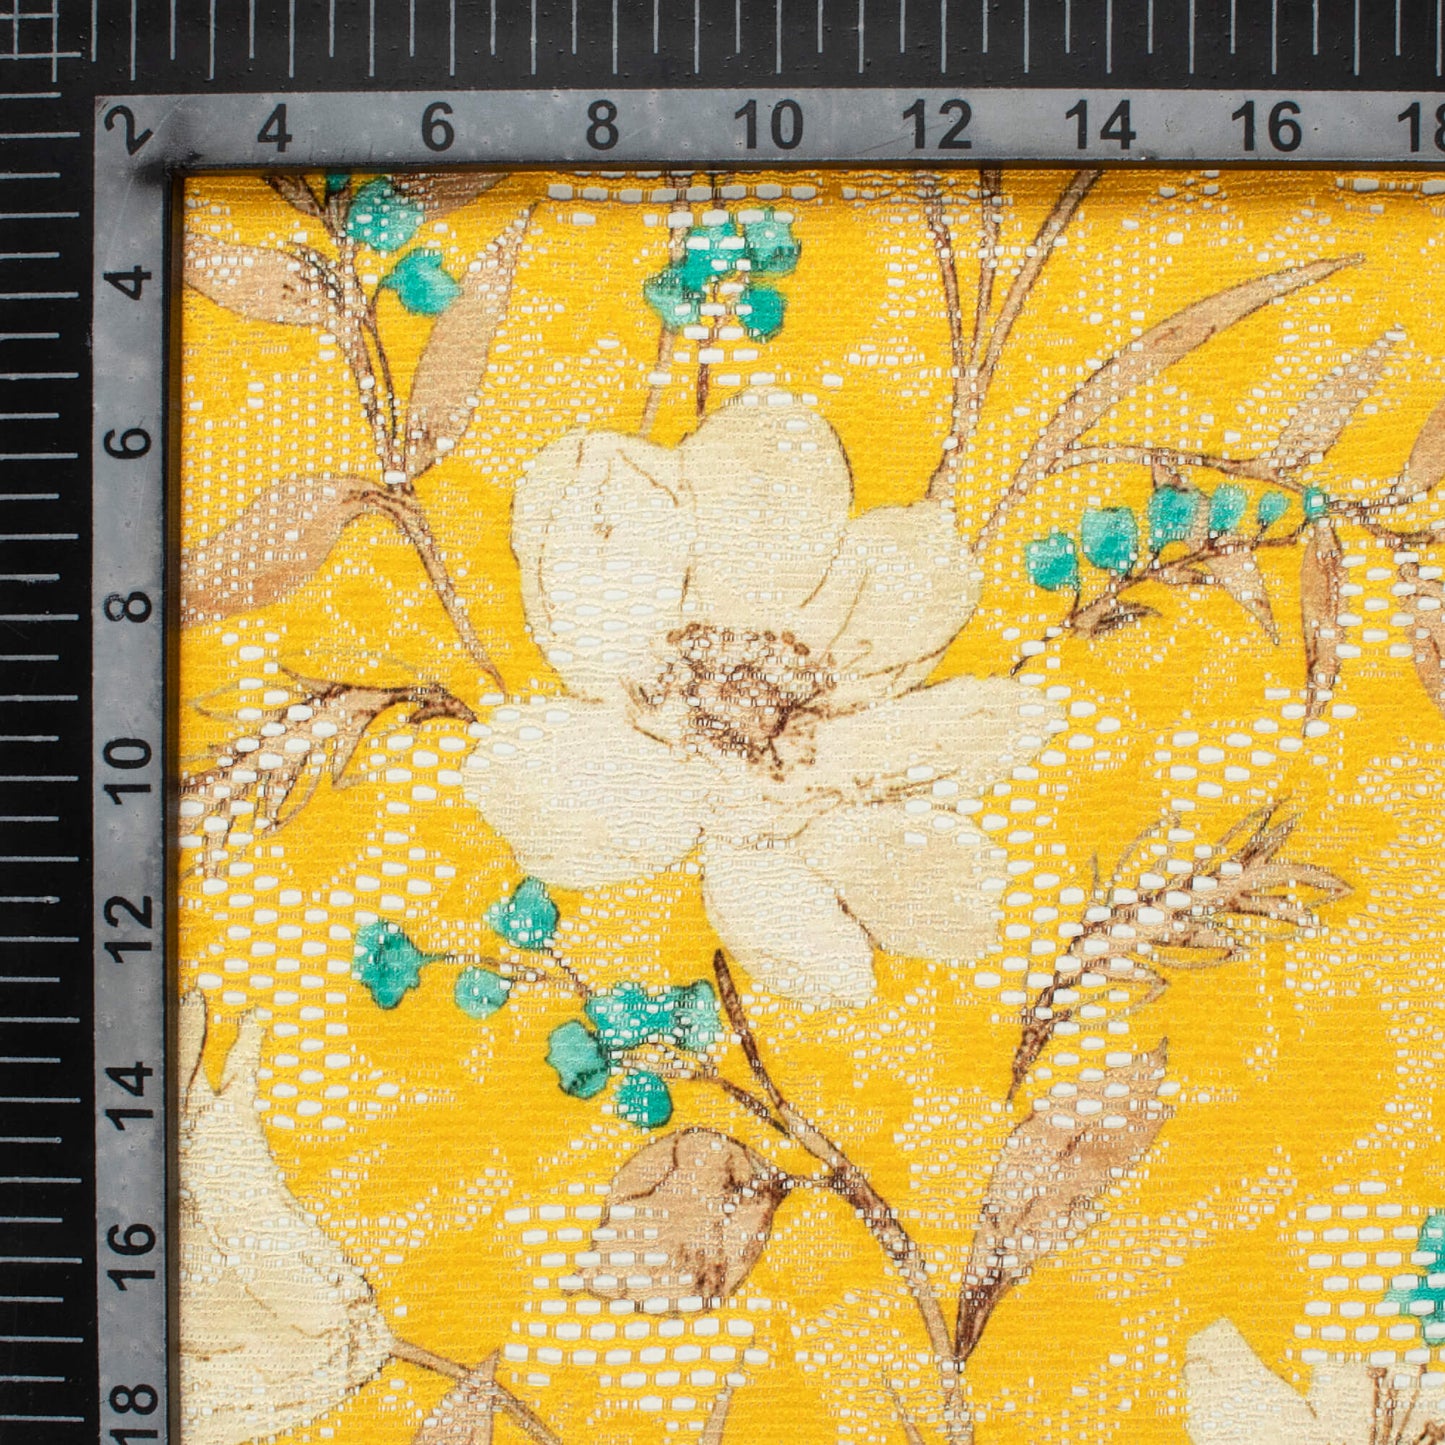 Amber Yellow And Off White Floral Pattern Digital Print Floral Raschel Net Fabric (Width 58 Inches)